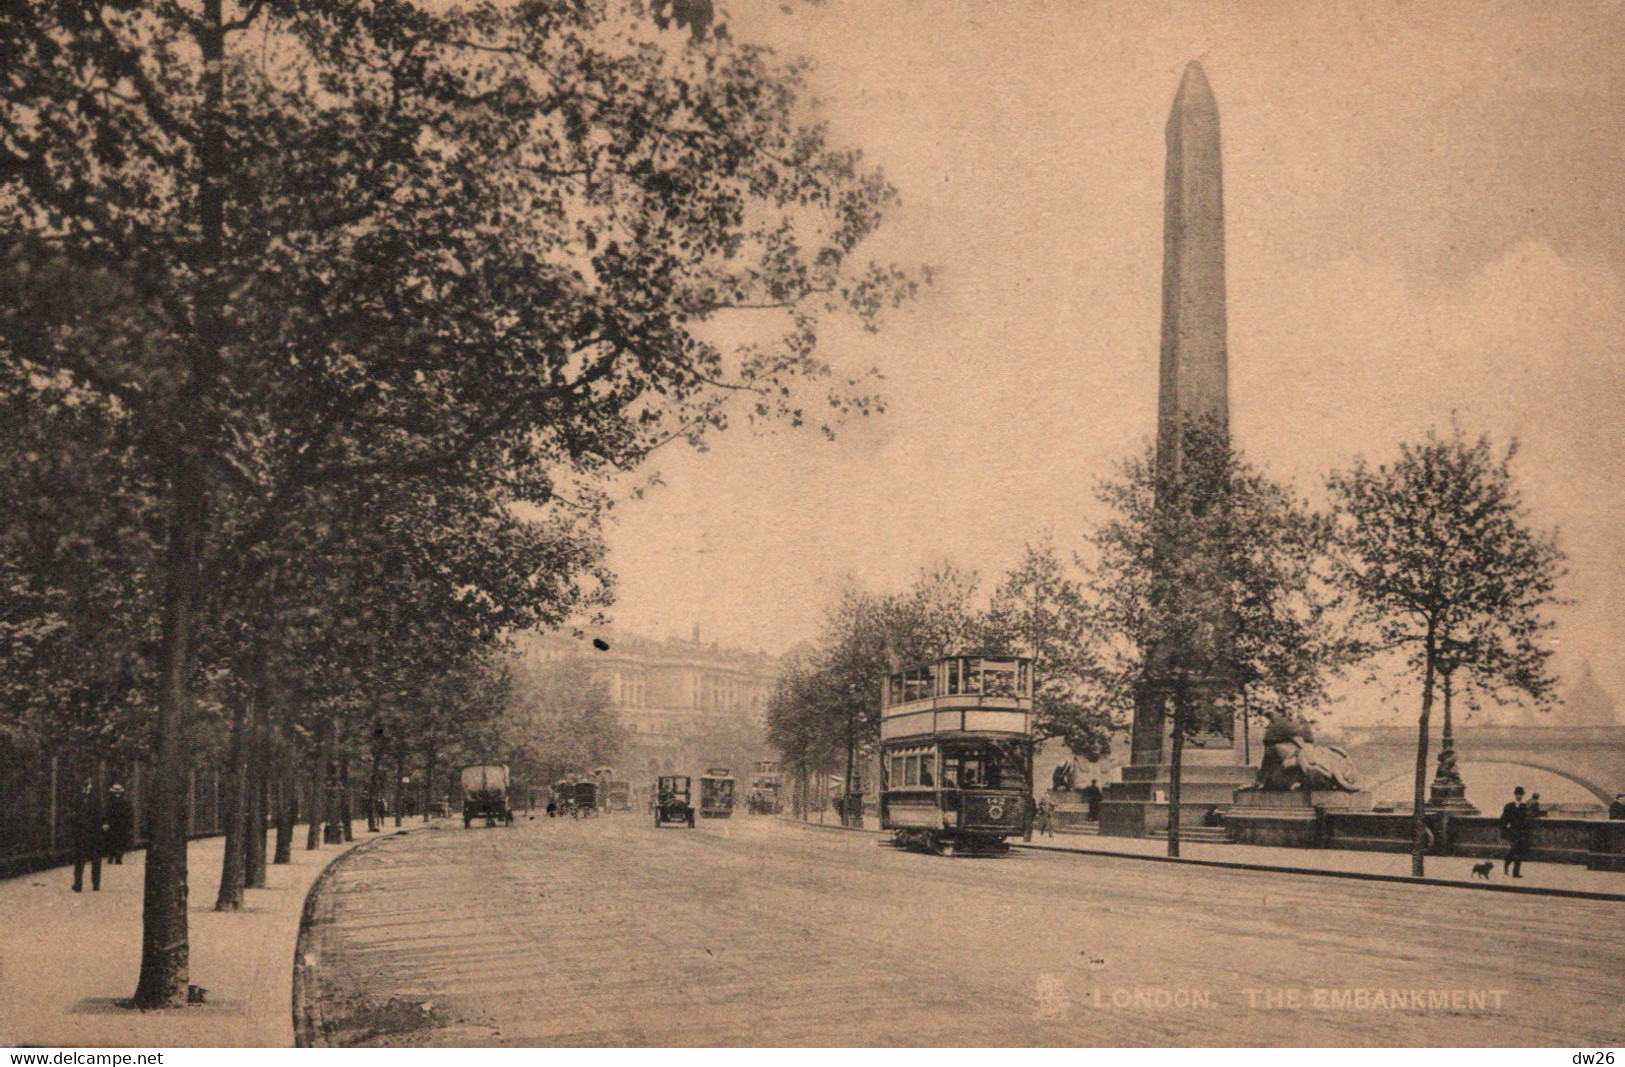 London - Thames Embankment And Cleopatra's Needle, Bus - Raphael Tuck & Sons - River Thames